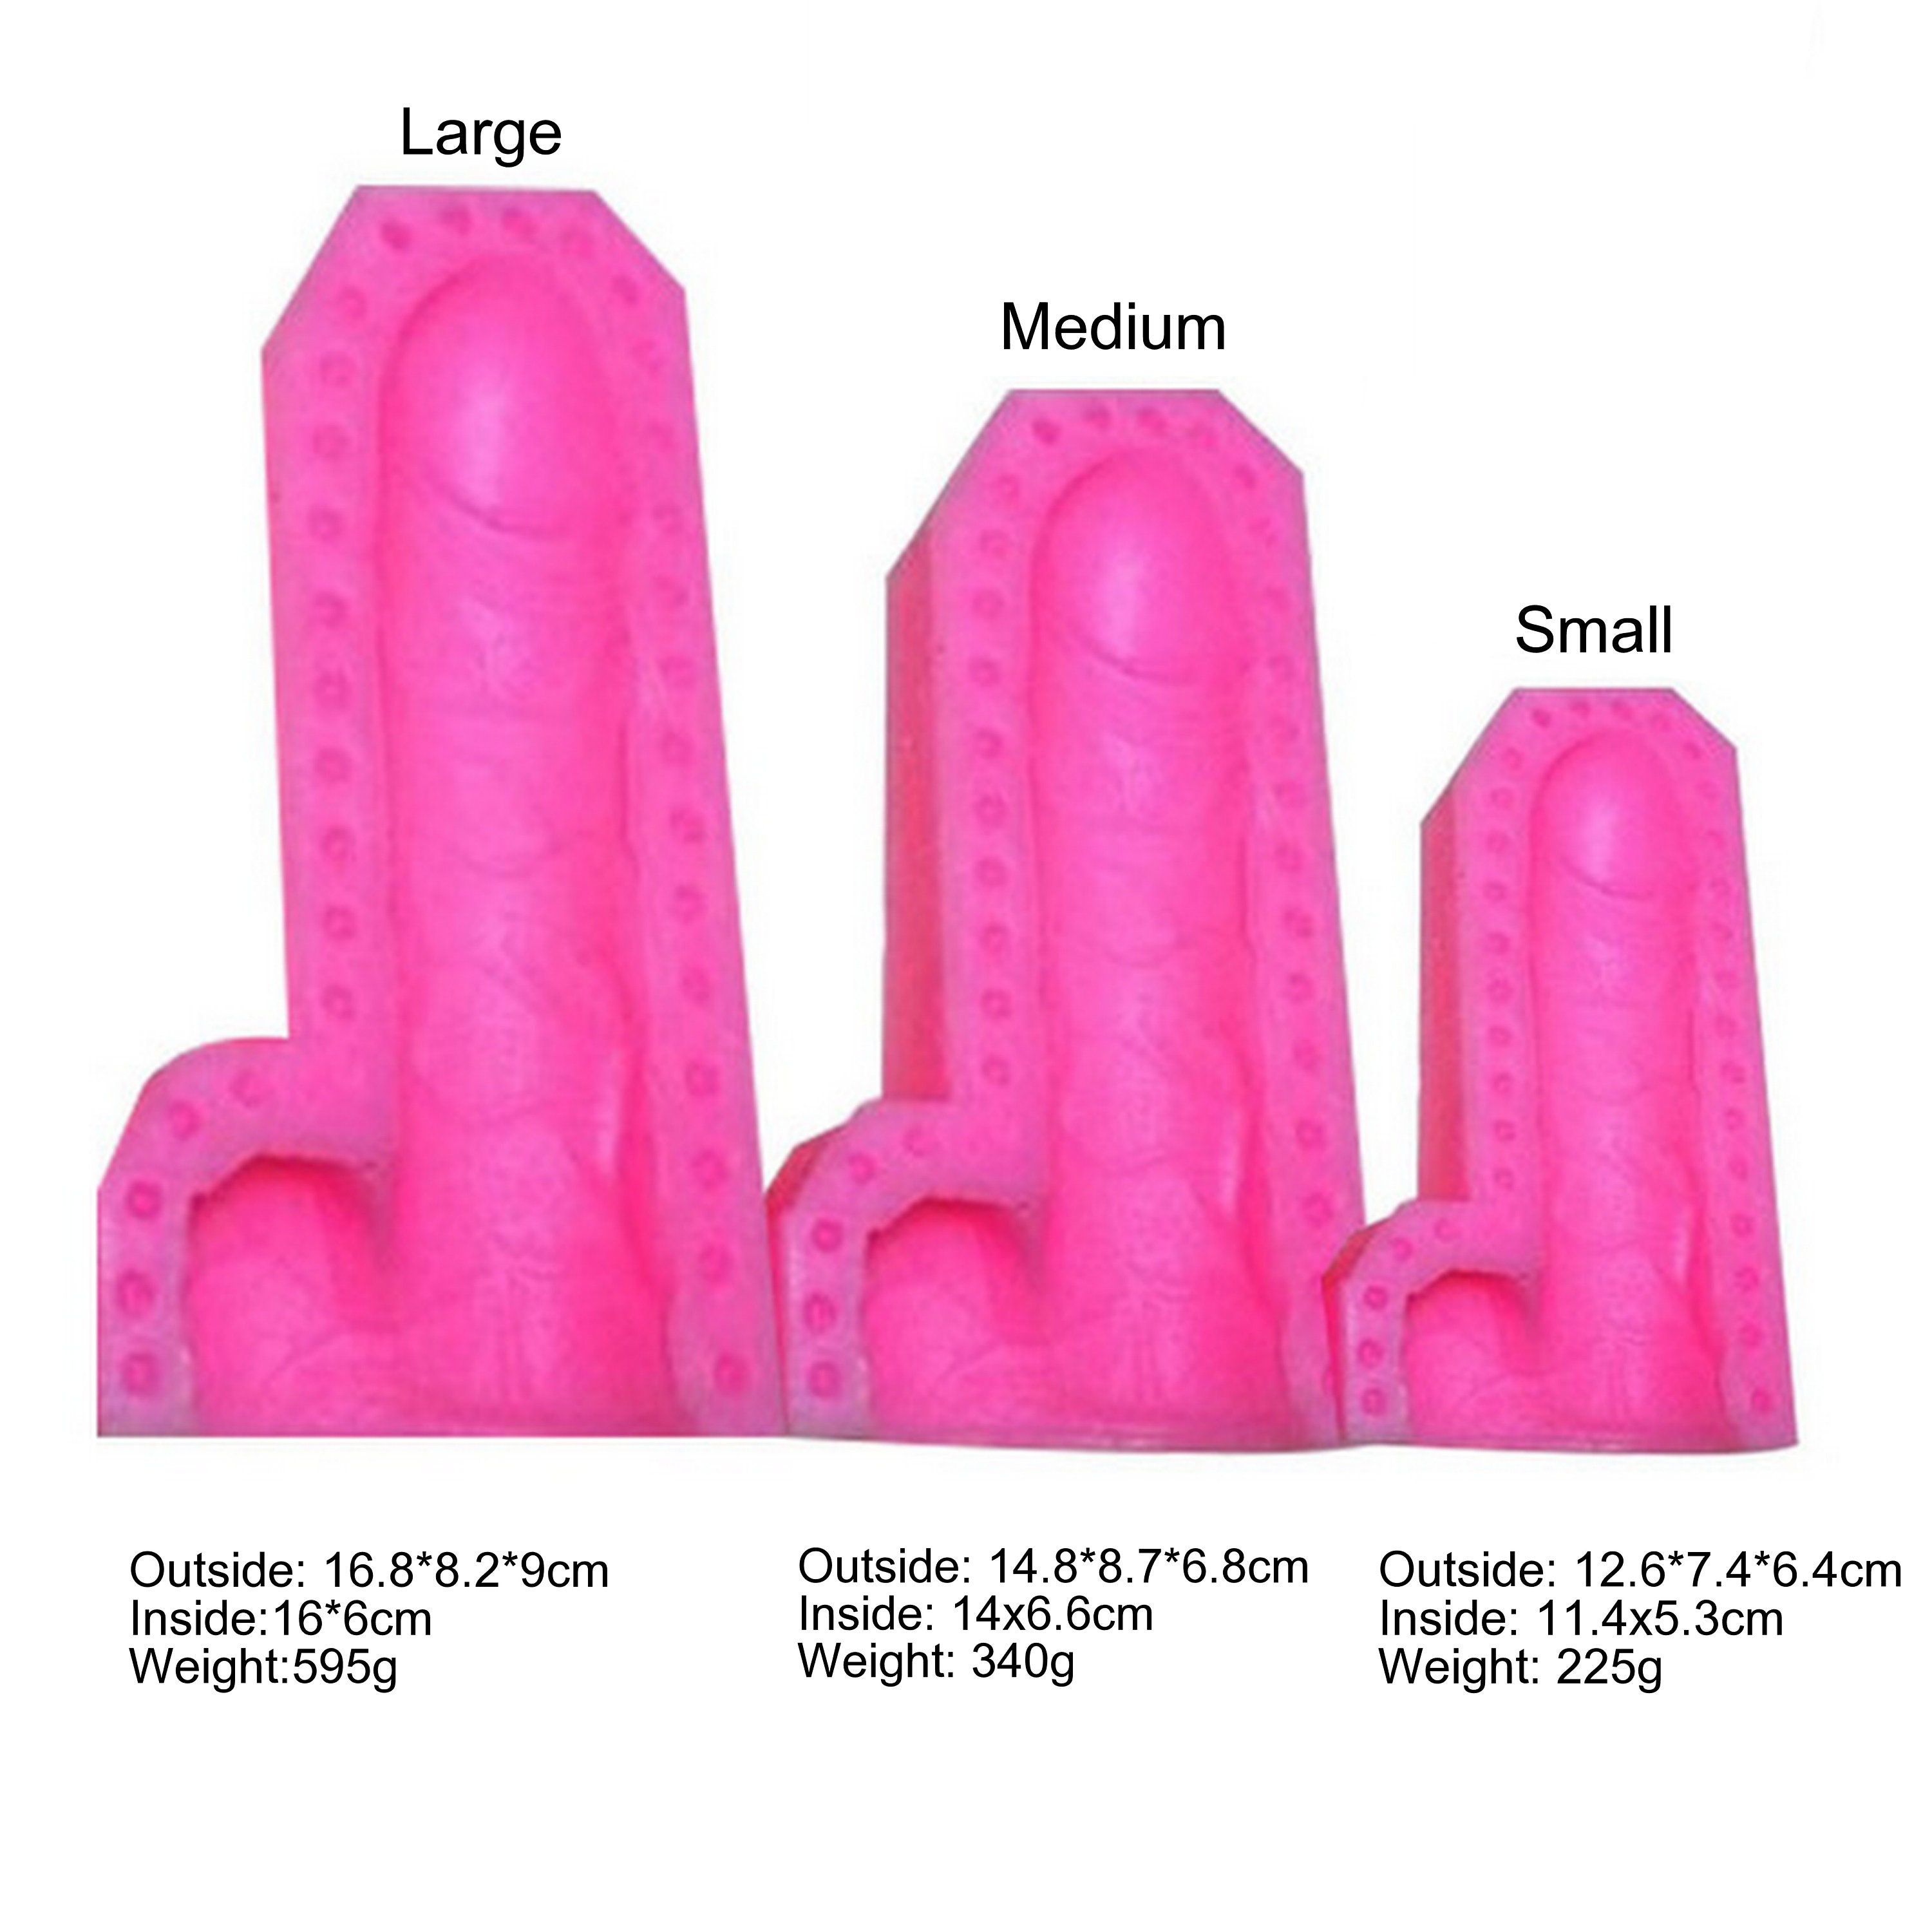 Penis Mold, Dick Mold, XXX Cake, Penis Cake, Dick Cake, 3-D Penis Mold, Penis Cupcakes, Adult Lollipops, Adult Candy Mold, Adult Chocolate  Mold